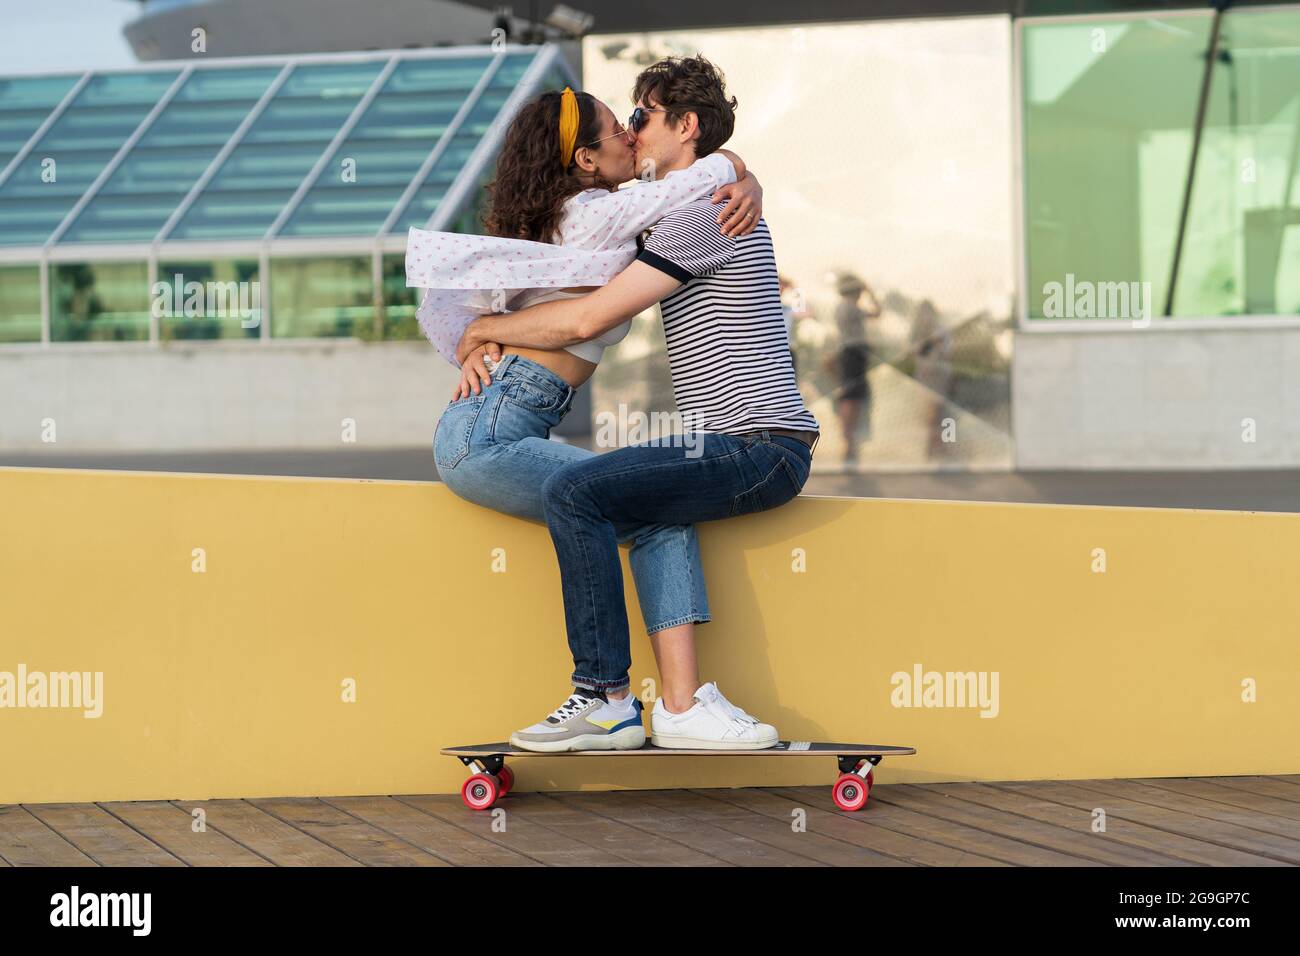 Stylish couple kissing sitting in skatepark. Young cute ...